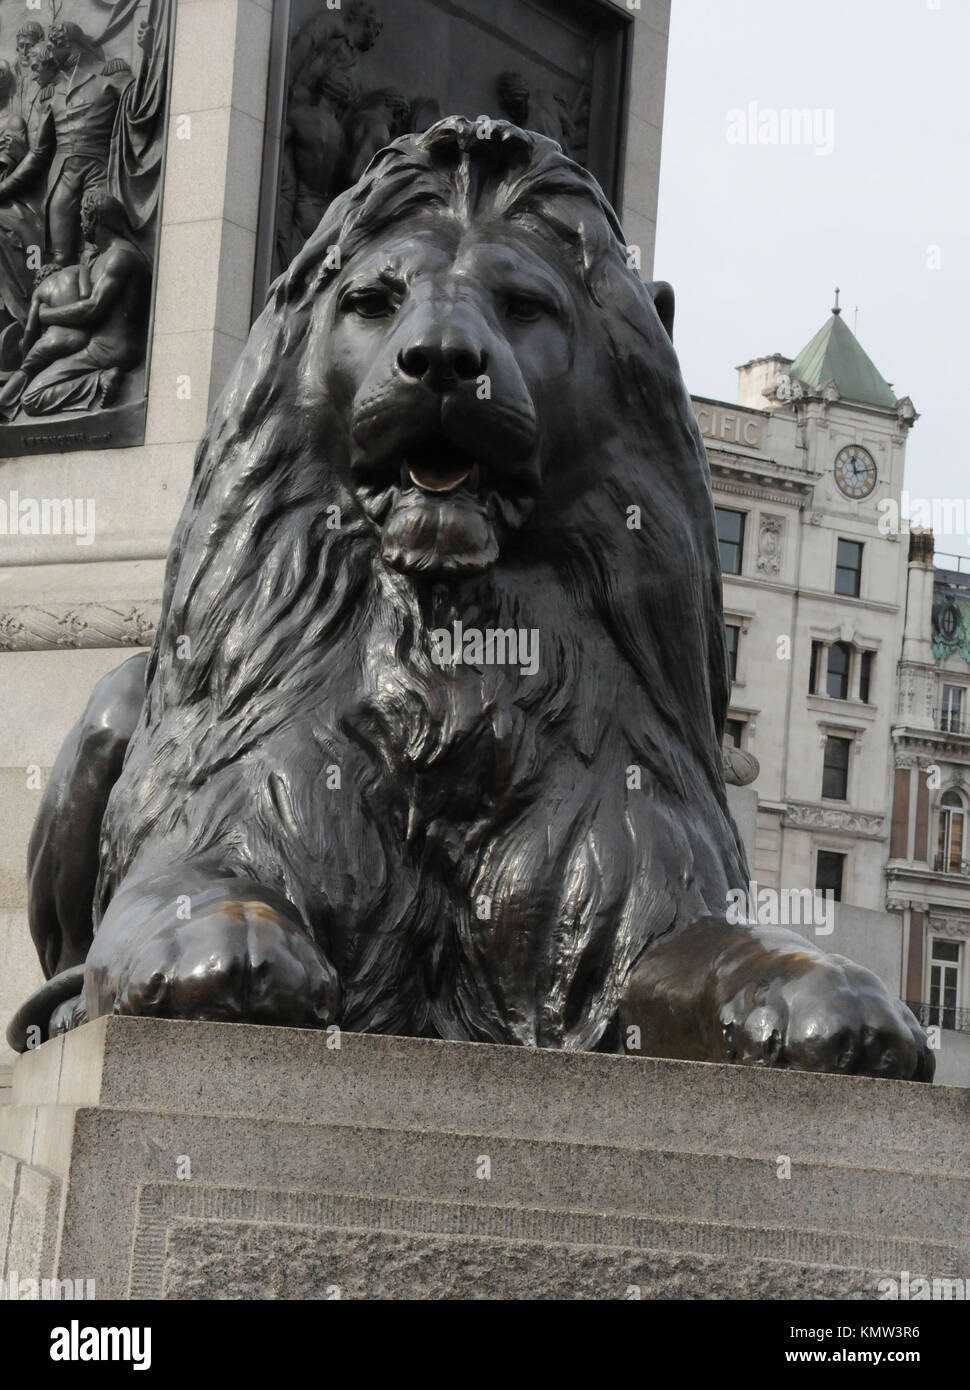 Lion in Trafalgar Square on April 7, 2011 in London, England. Photo by Barry King/Alamy Stock Photo Stock Photo